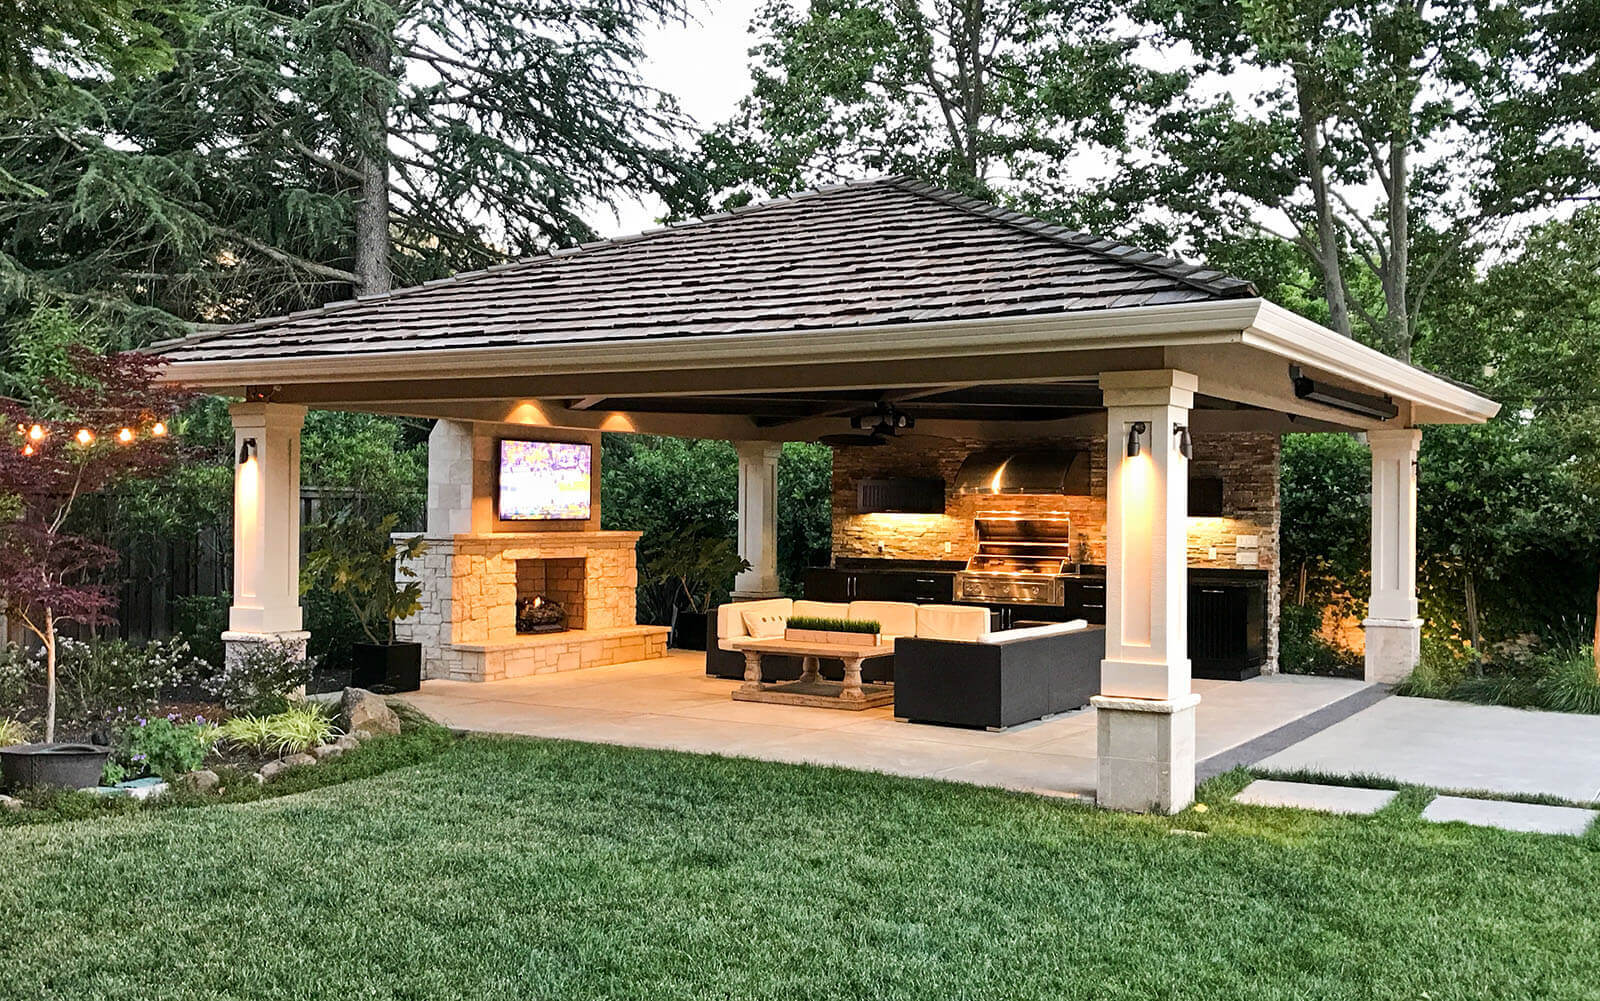 Pyramid-roofed pergola protects an outdoor living area with kitchen, bar, lounge and fireplace on a contemporary concrete patio